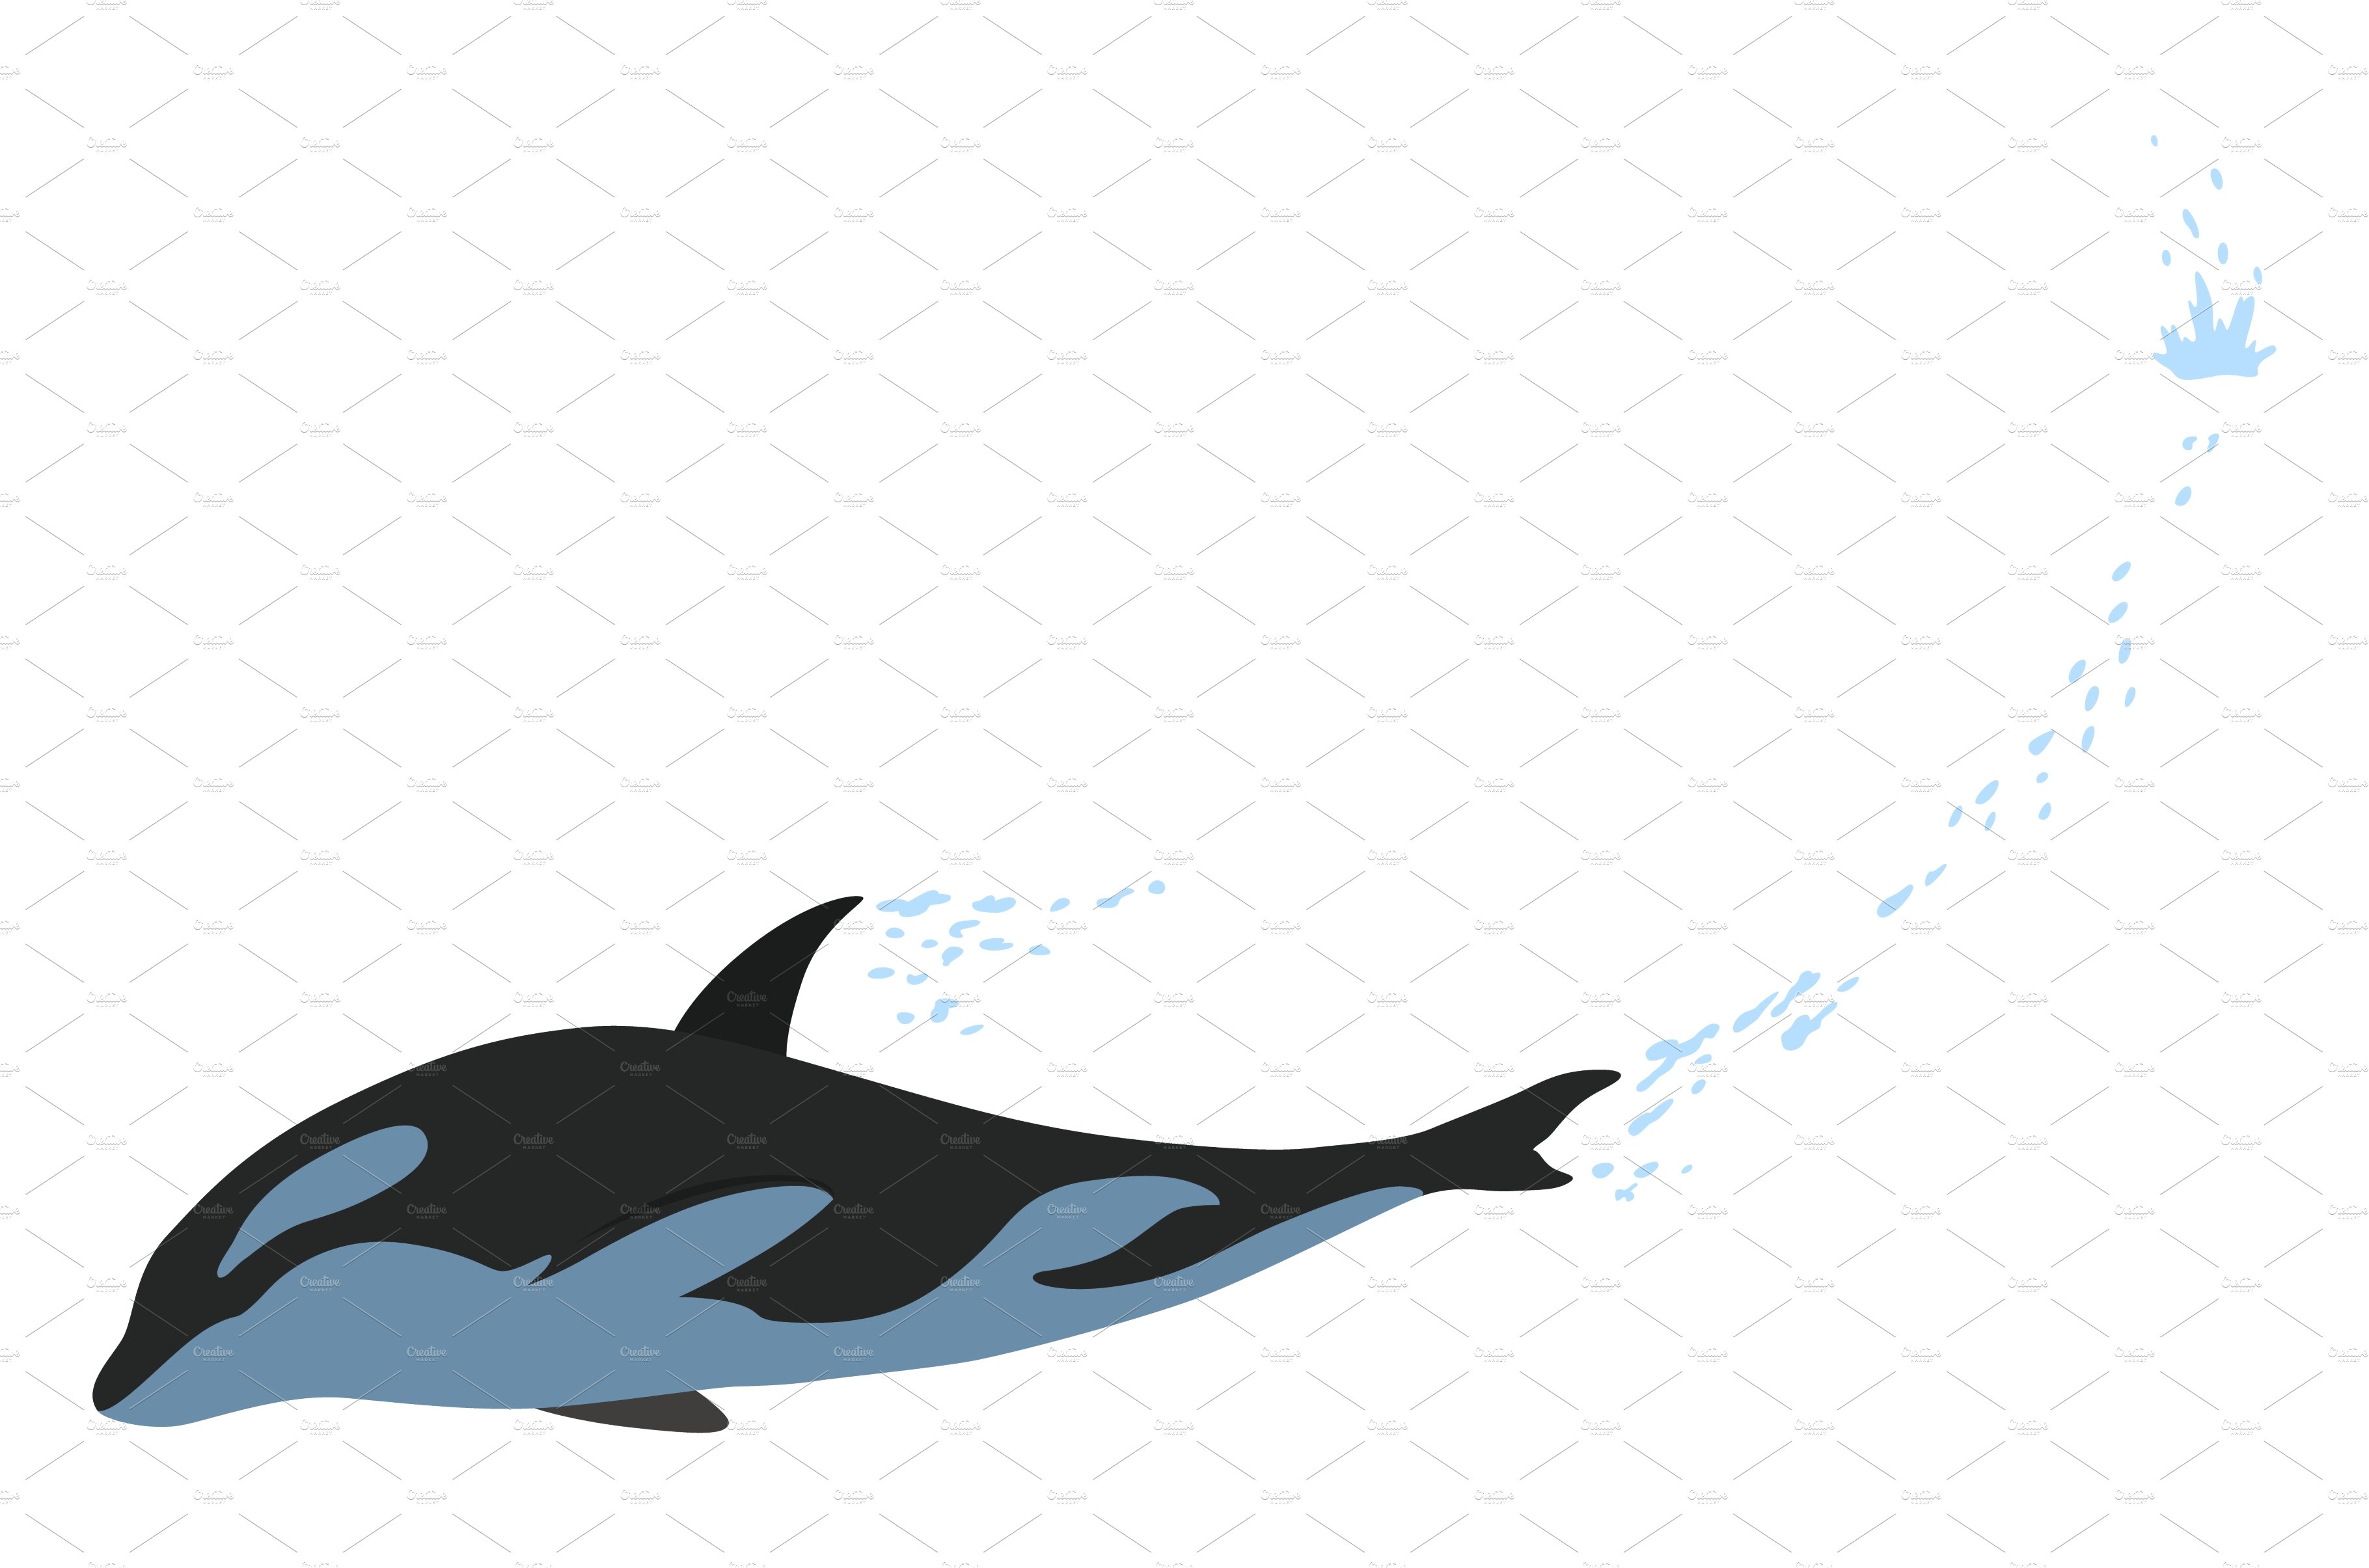 Orca animation in water cover image.